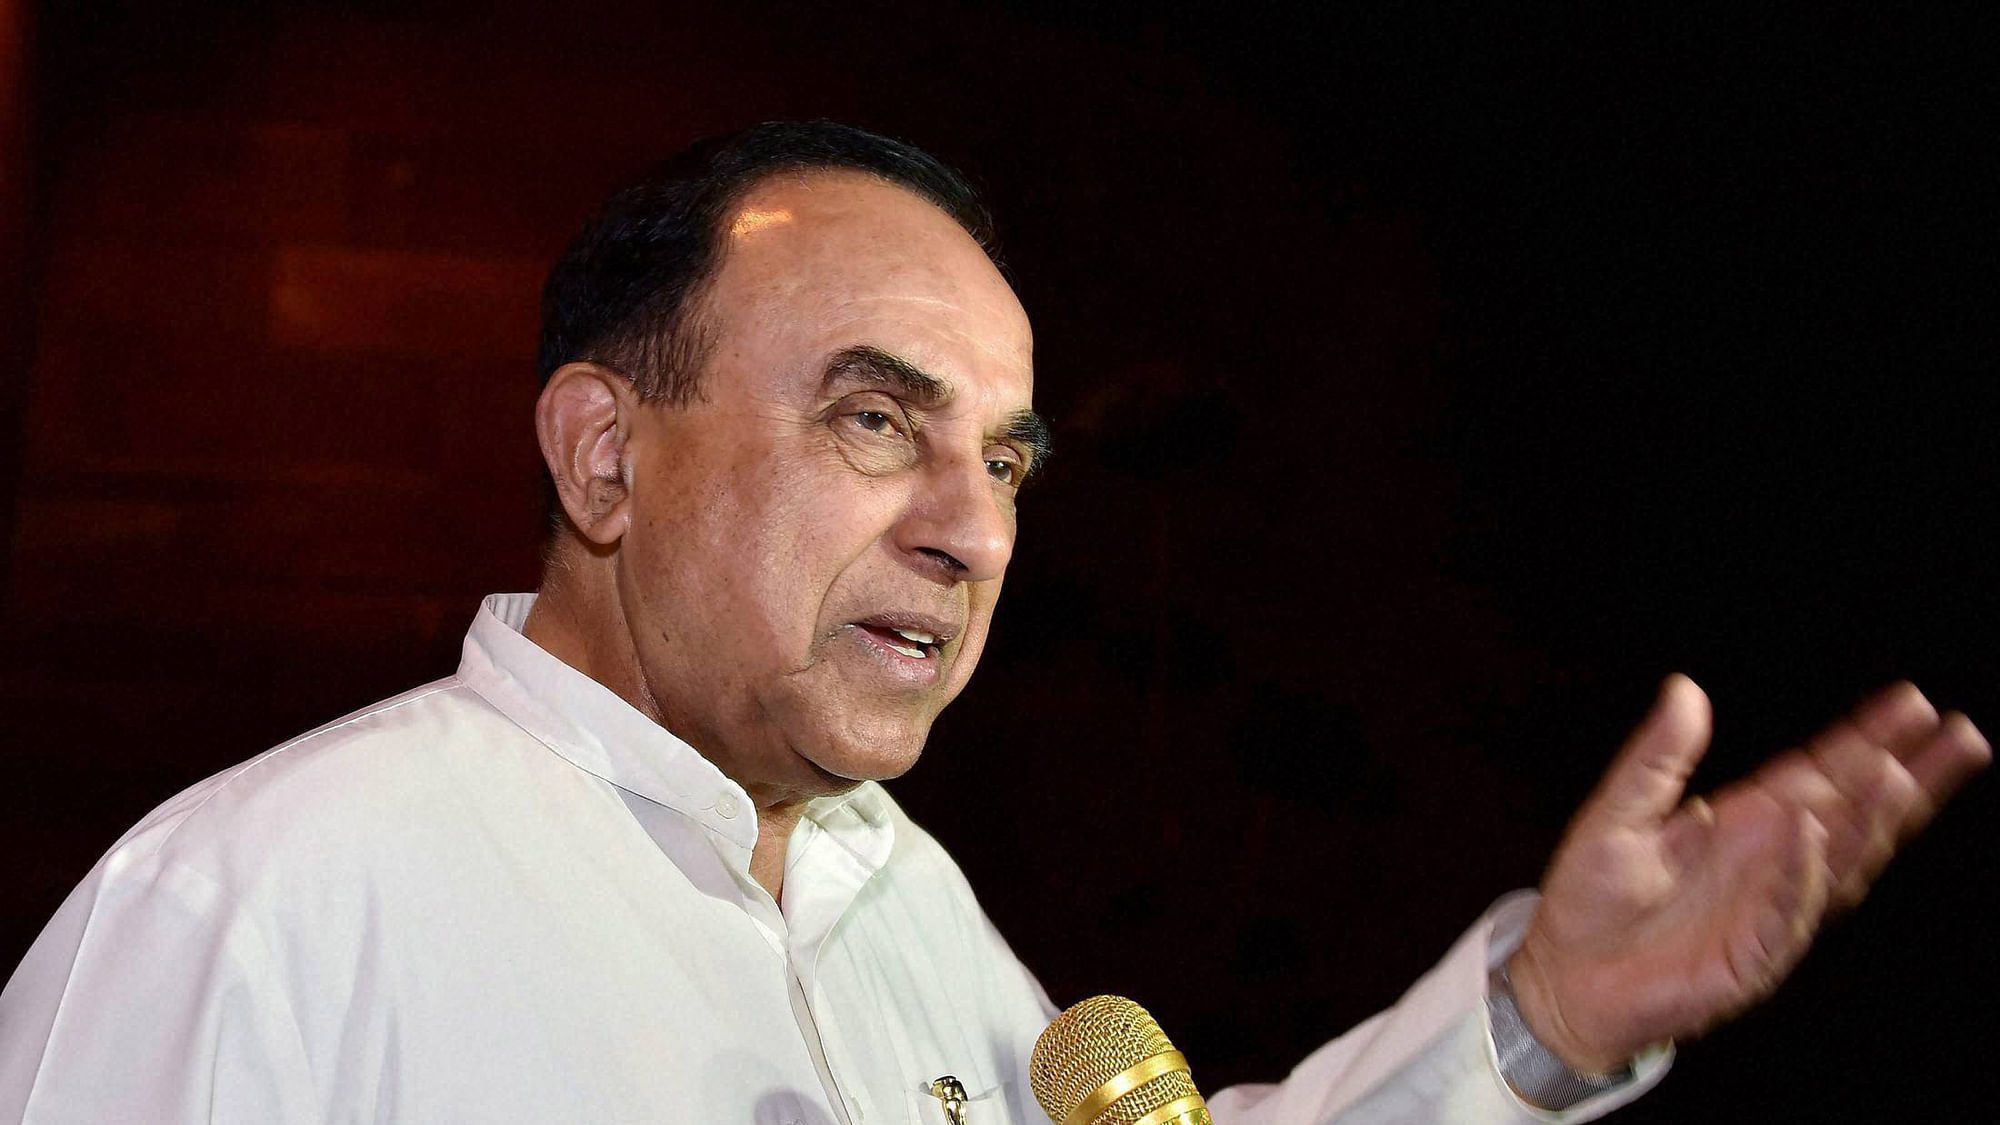 Subramanian Swamy talks to the media at Parliament House in New Delhi. (Photo: PTI)